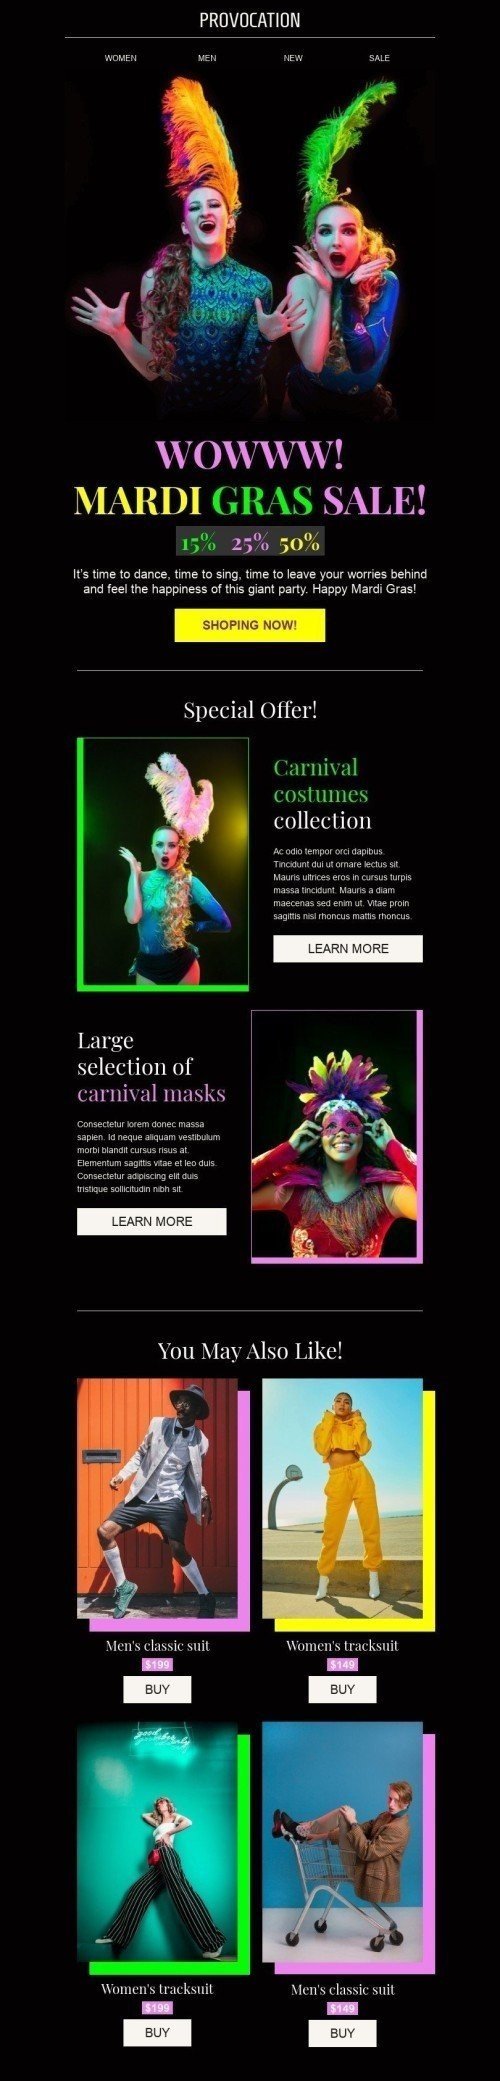 Mardi Gras Email Template "Mardi Gras Sale" for Fashion industry mobile view